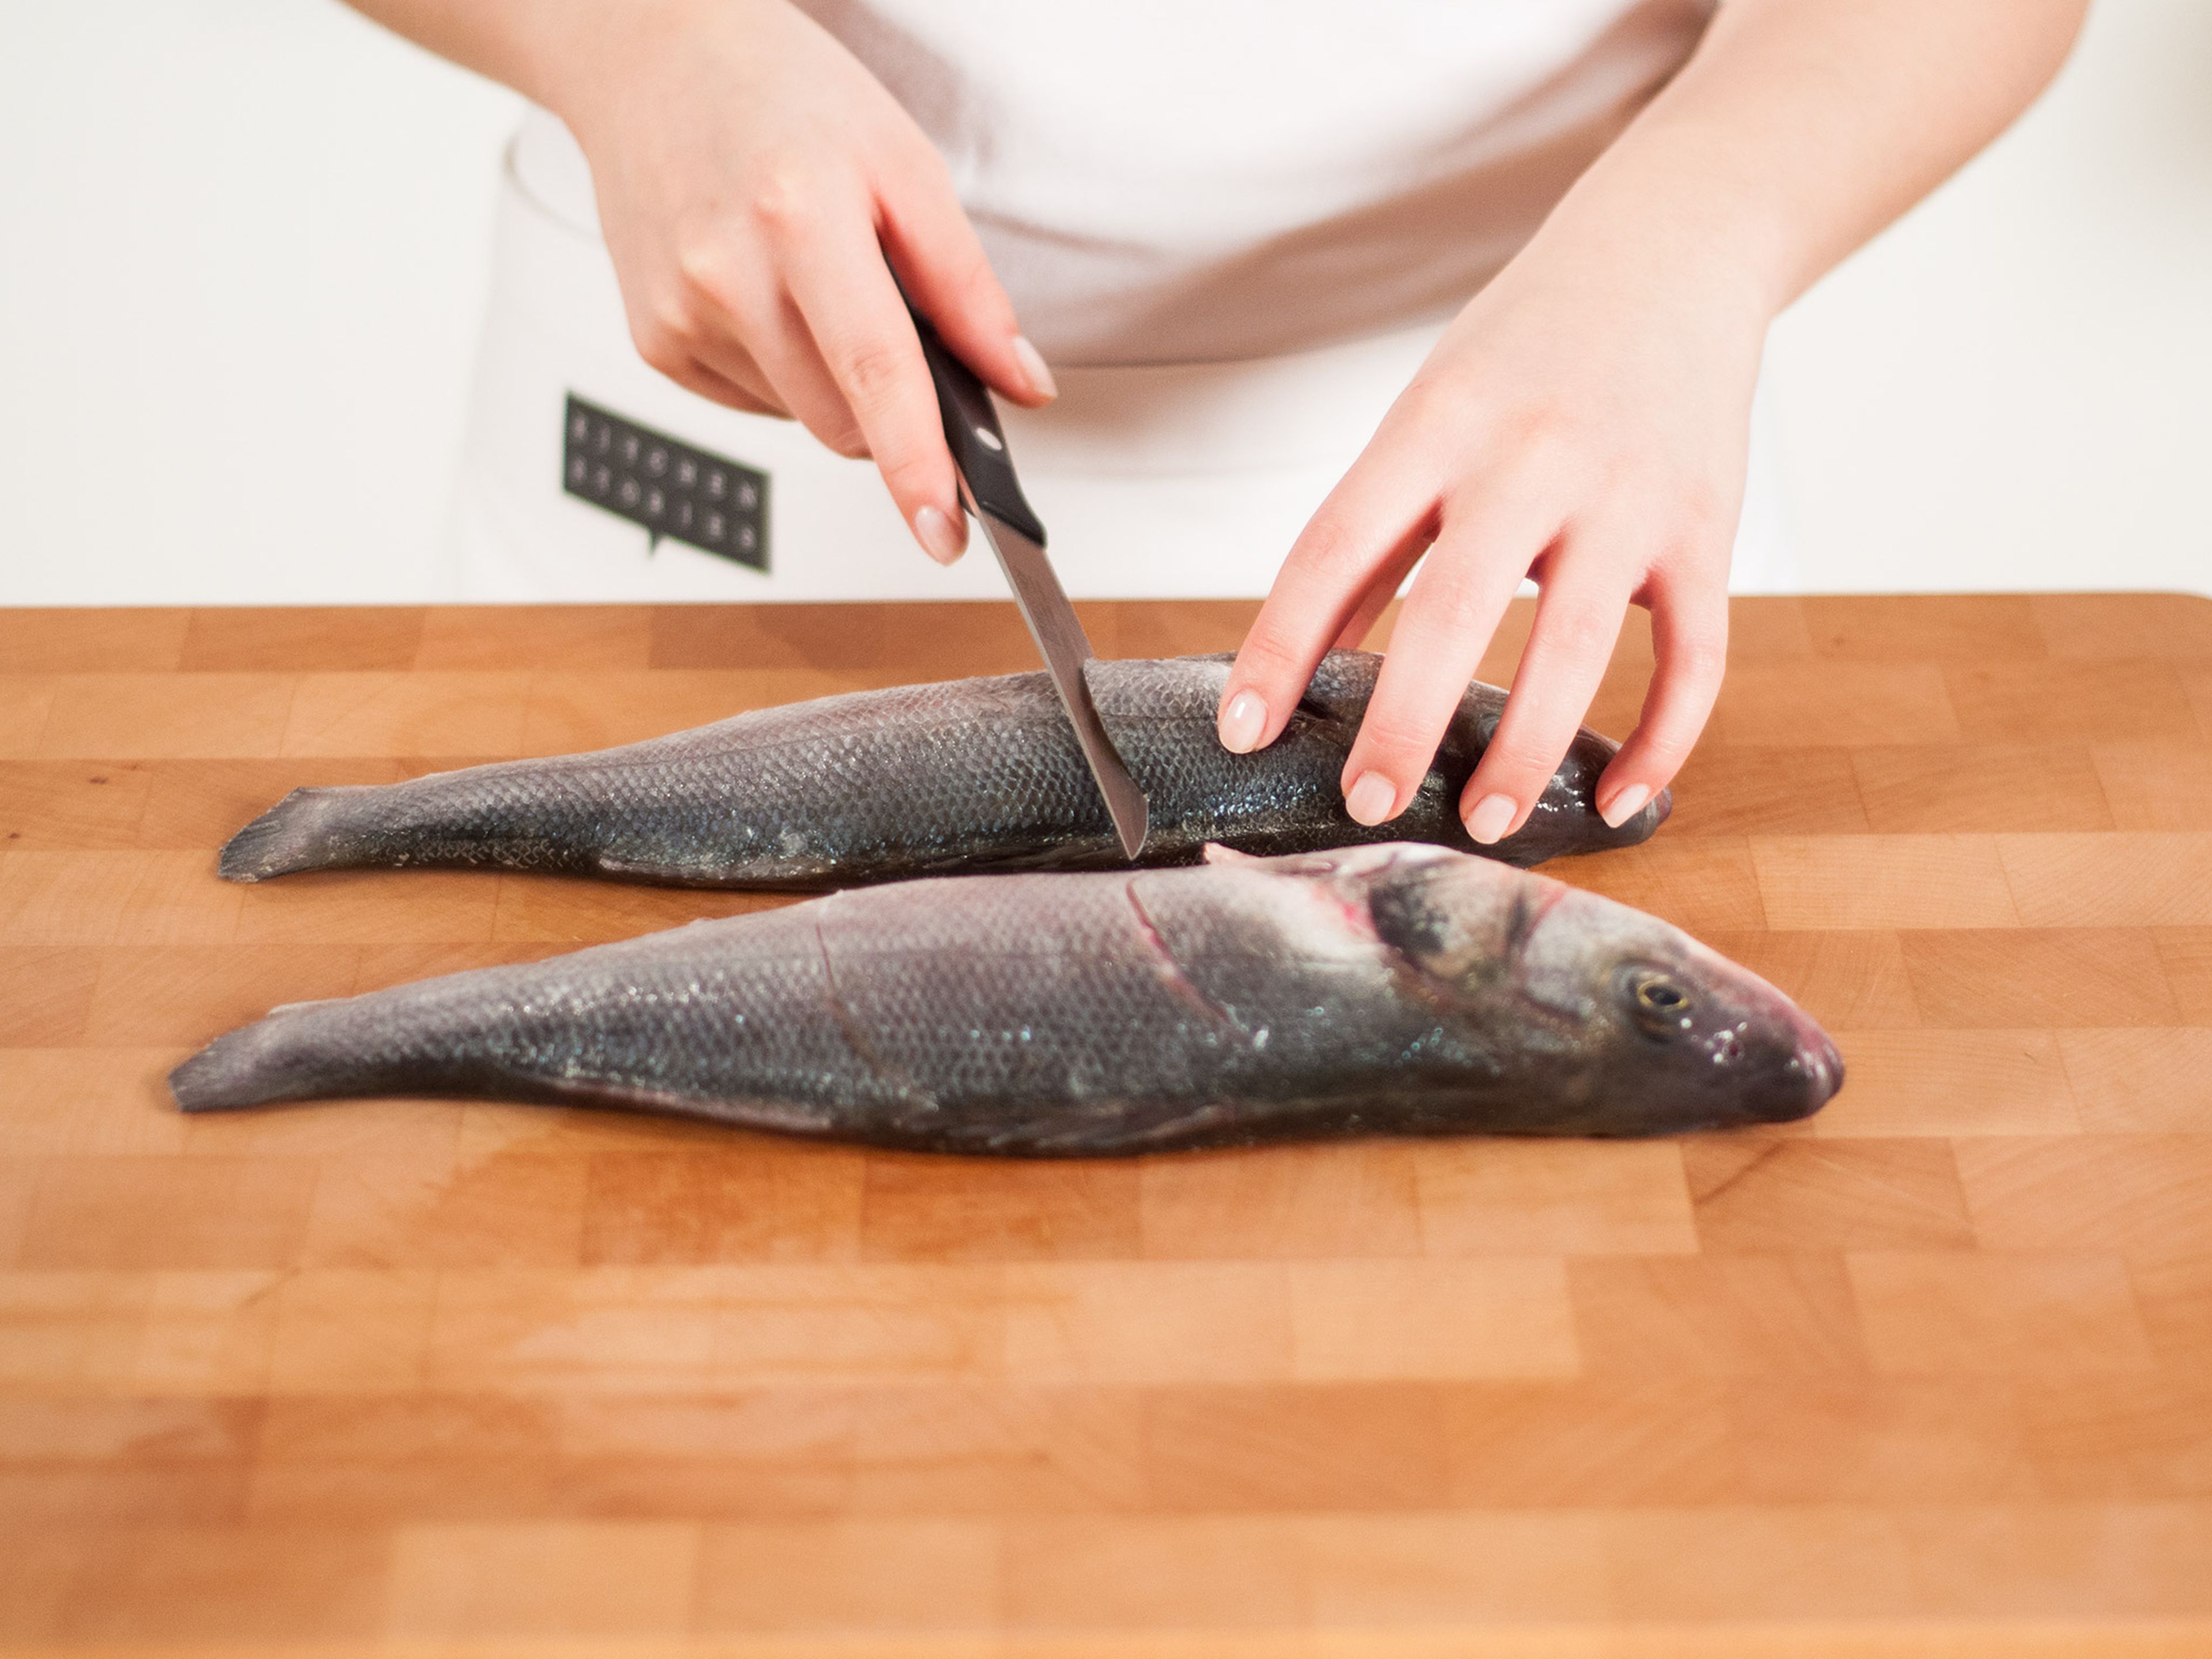 Place fish onto cutting board. Working with one fish at a time, use a sharp knife to make two cuts on each side of the fish.